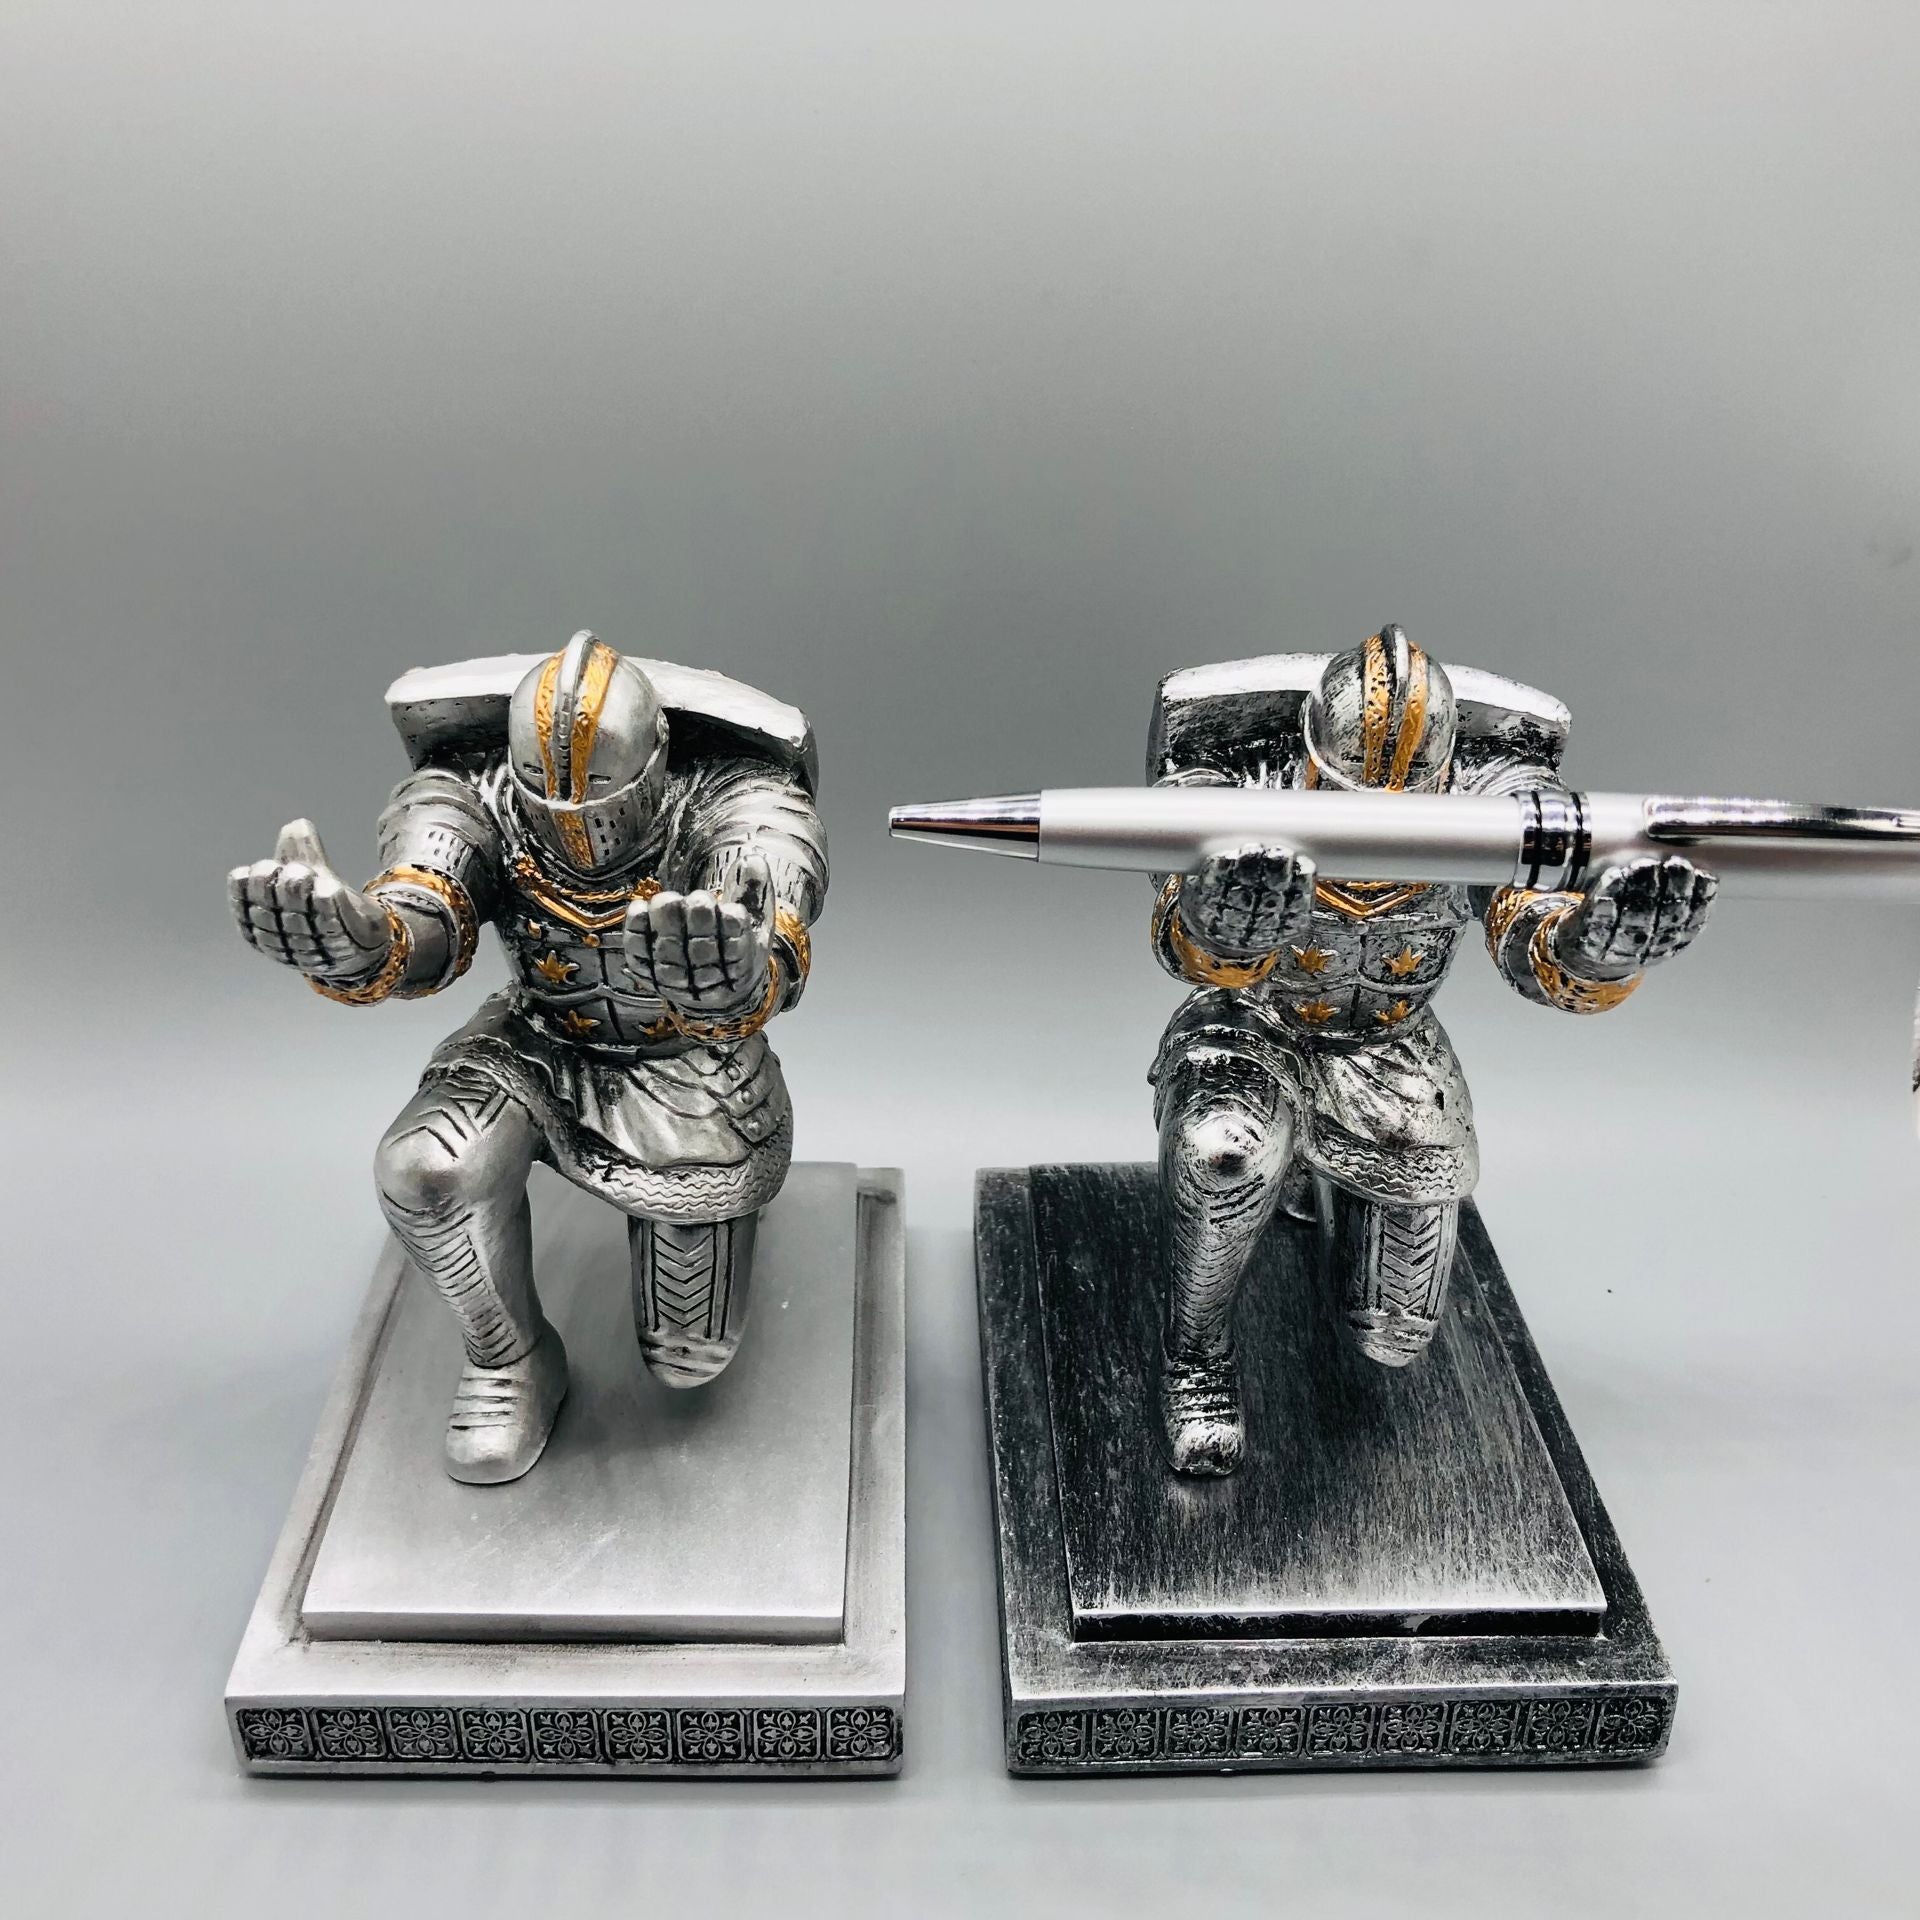 creative-executive-soldier-knight-pen-holder